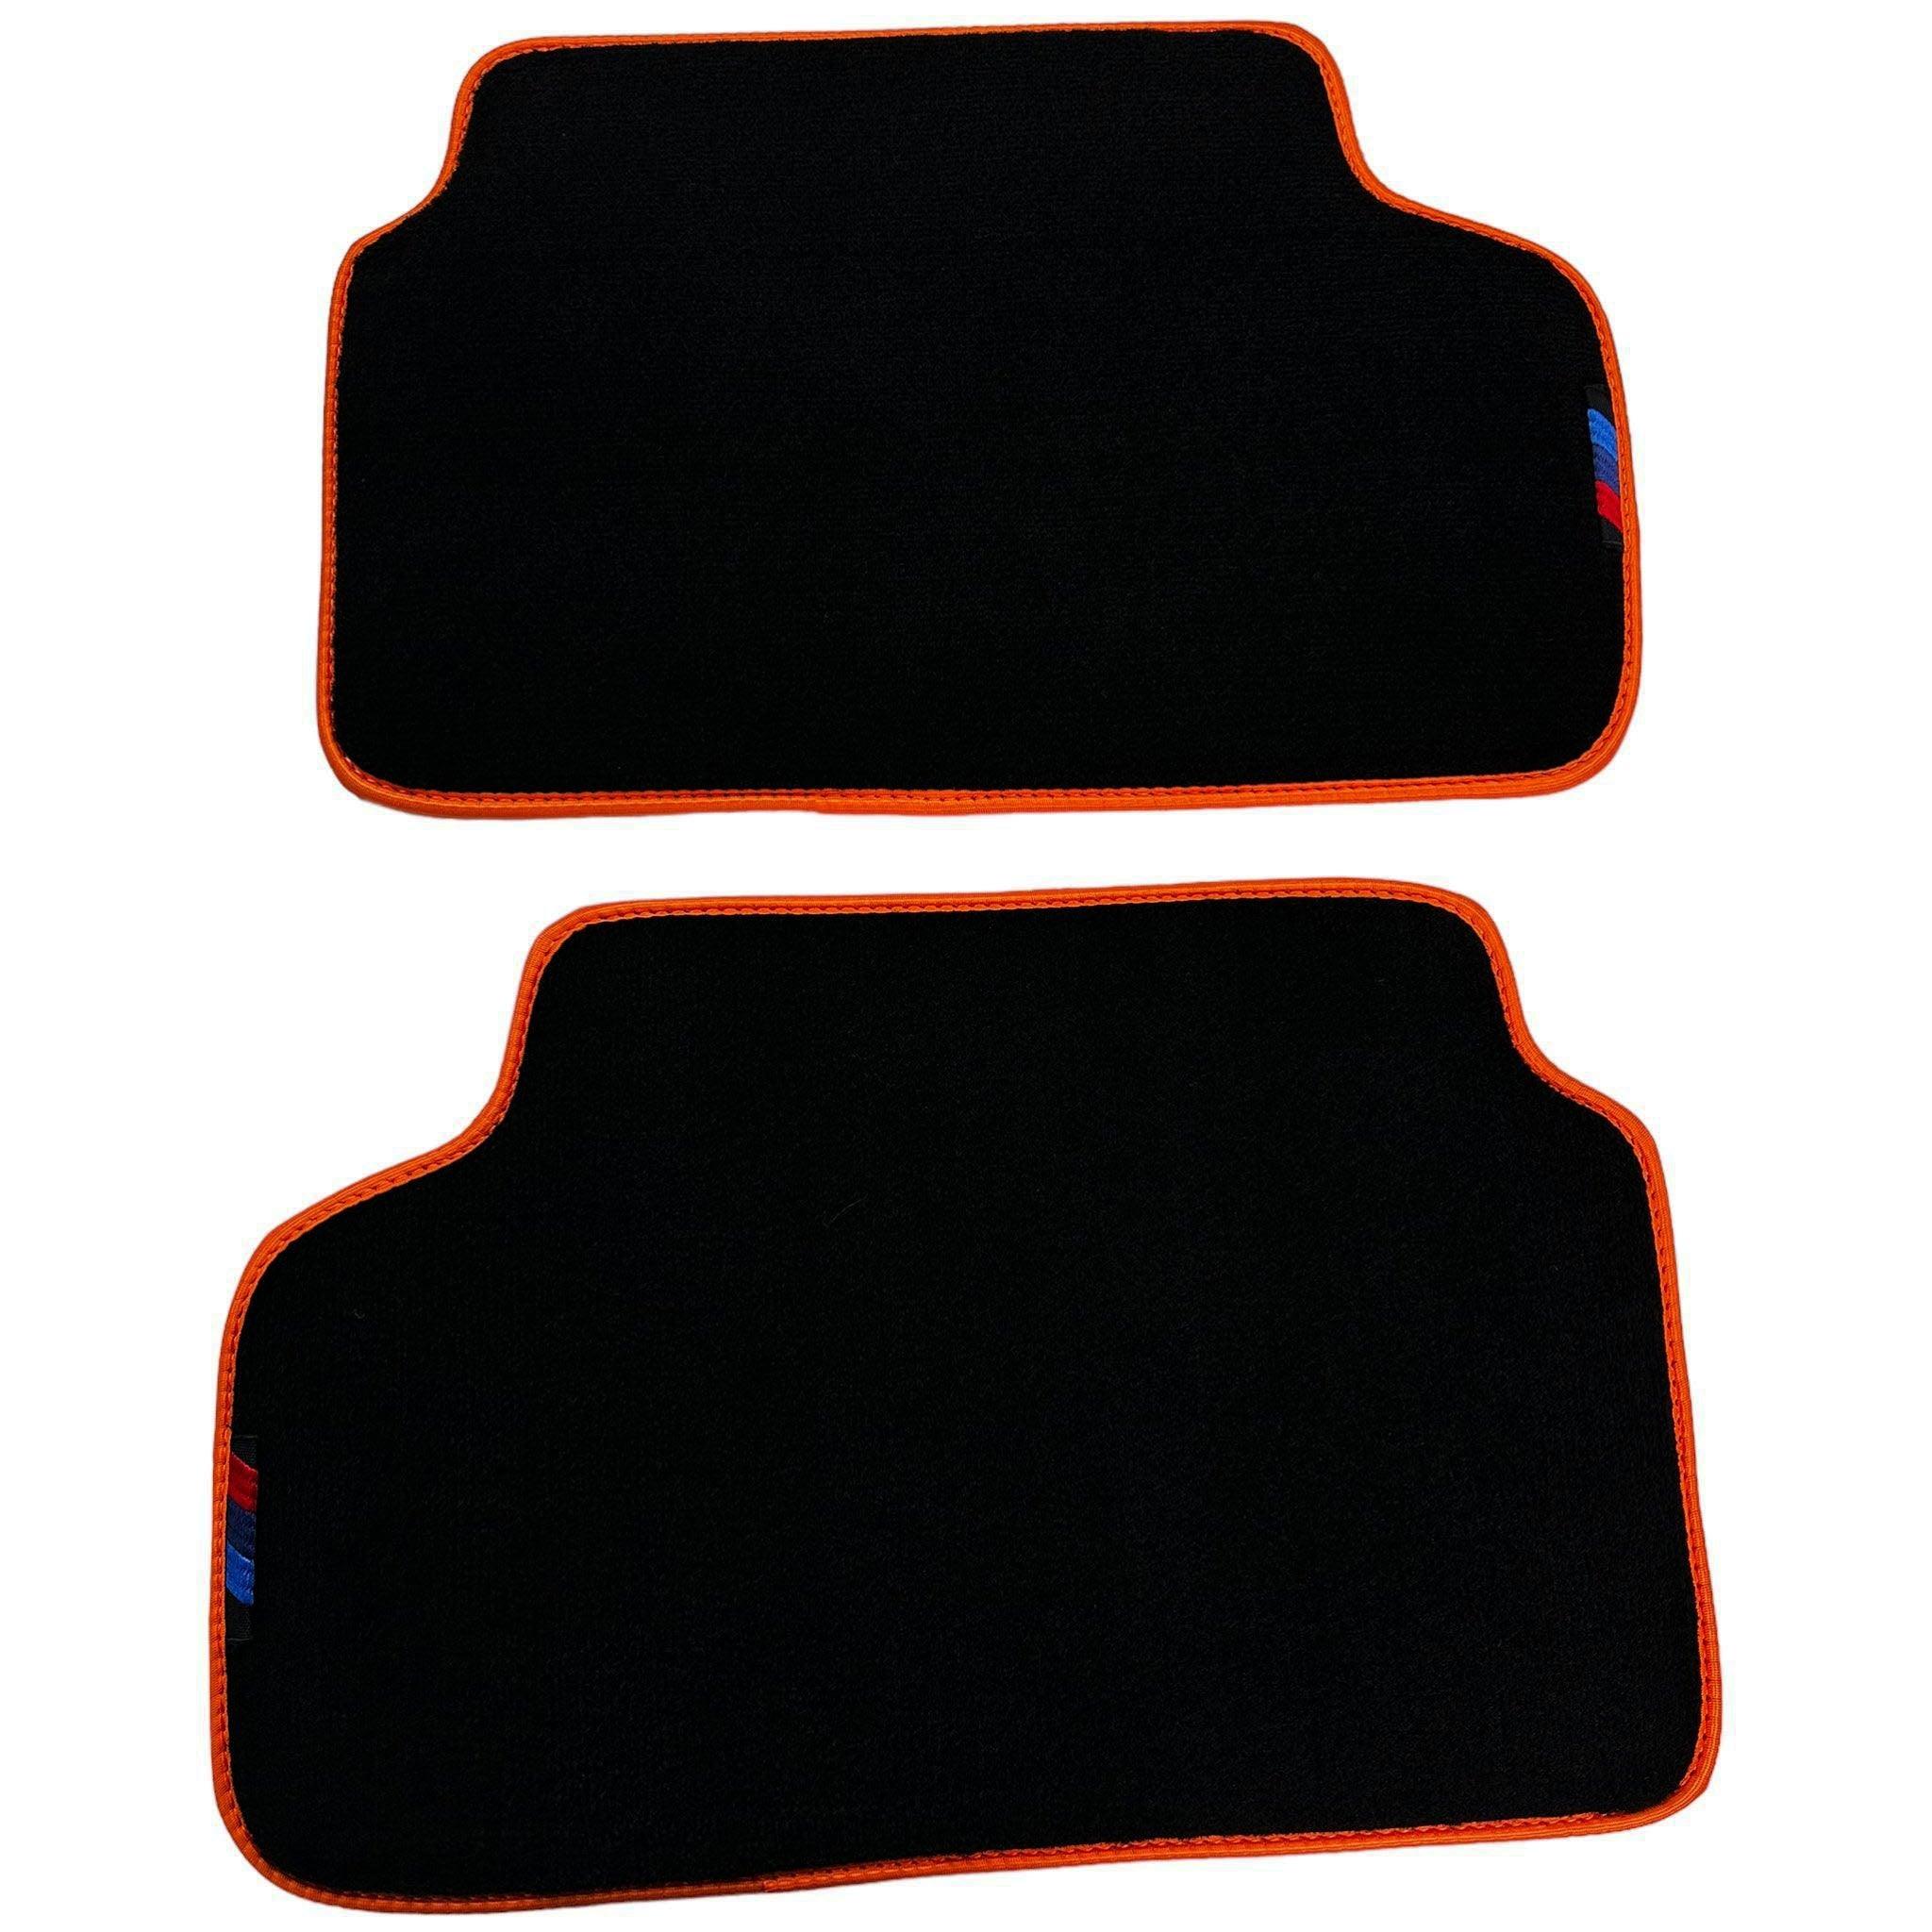 Black Floor Mats For BMW 7 Series E38 | Fighter Jet Edition